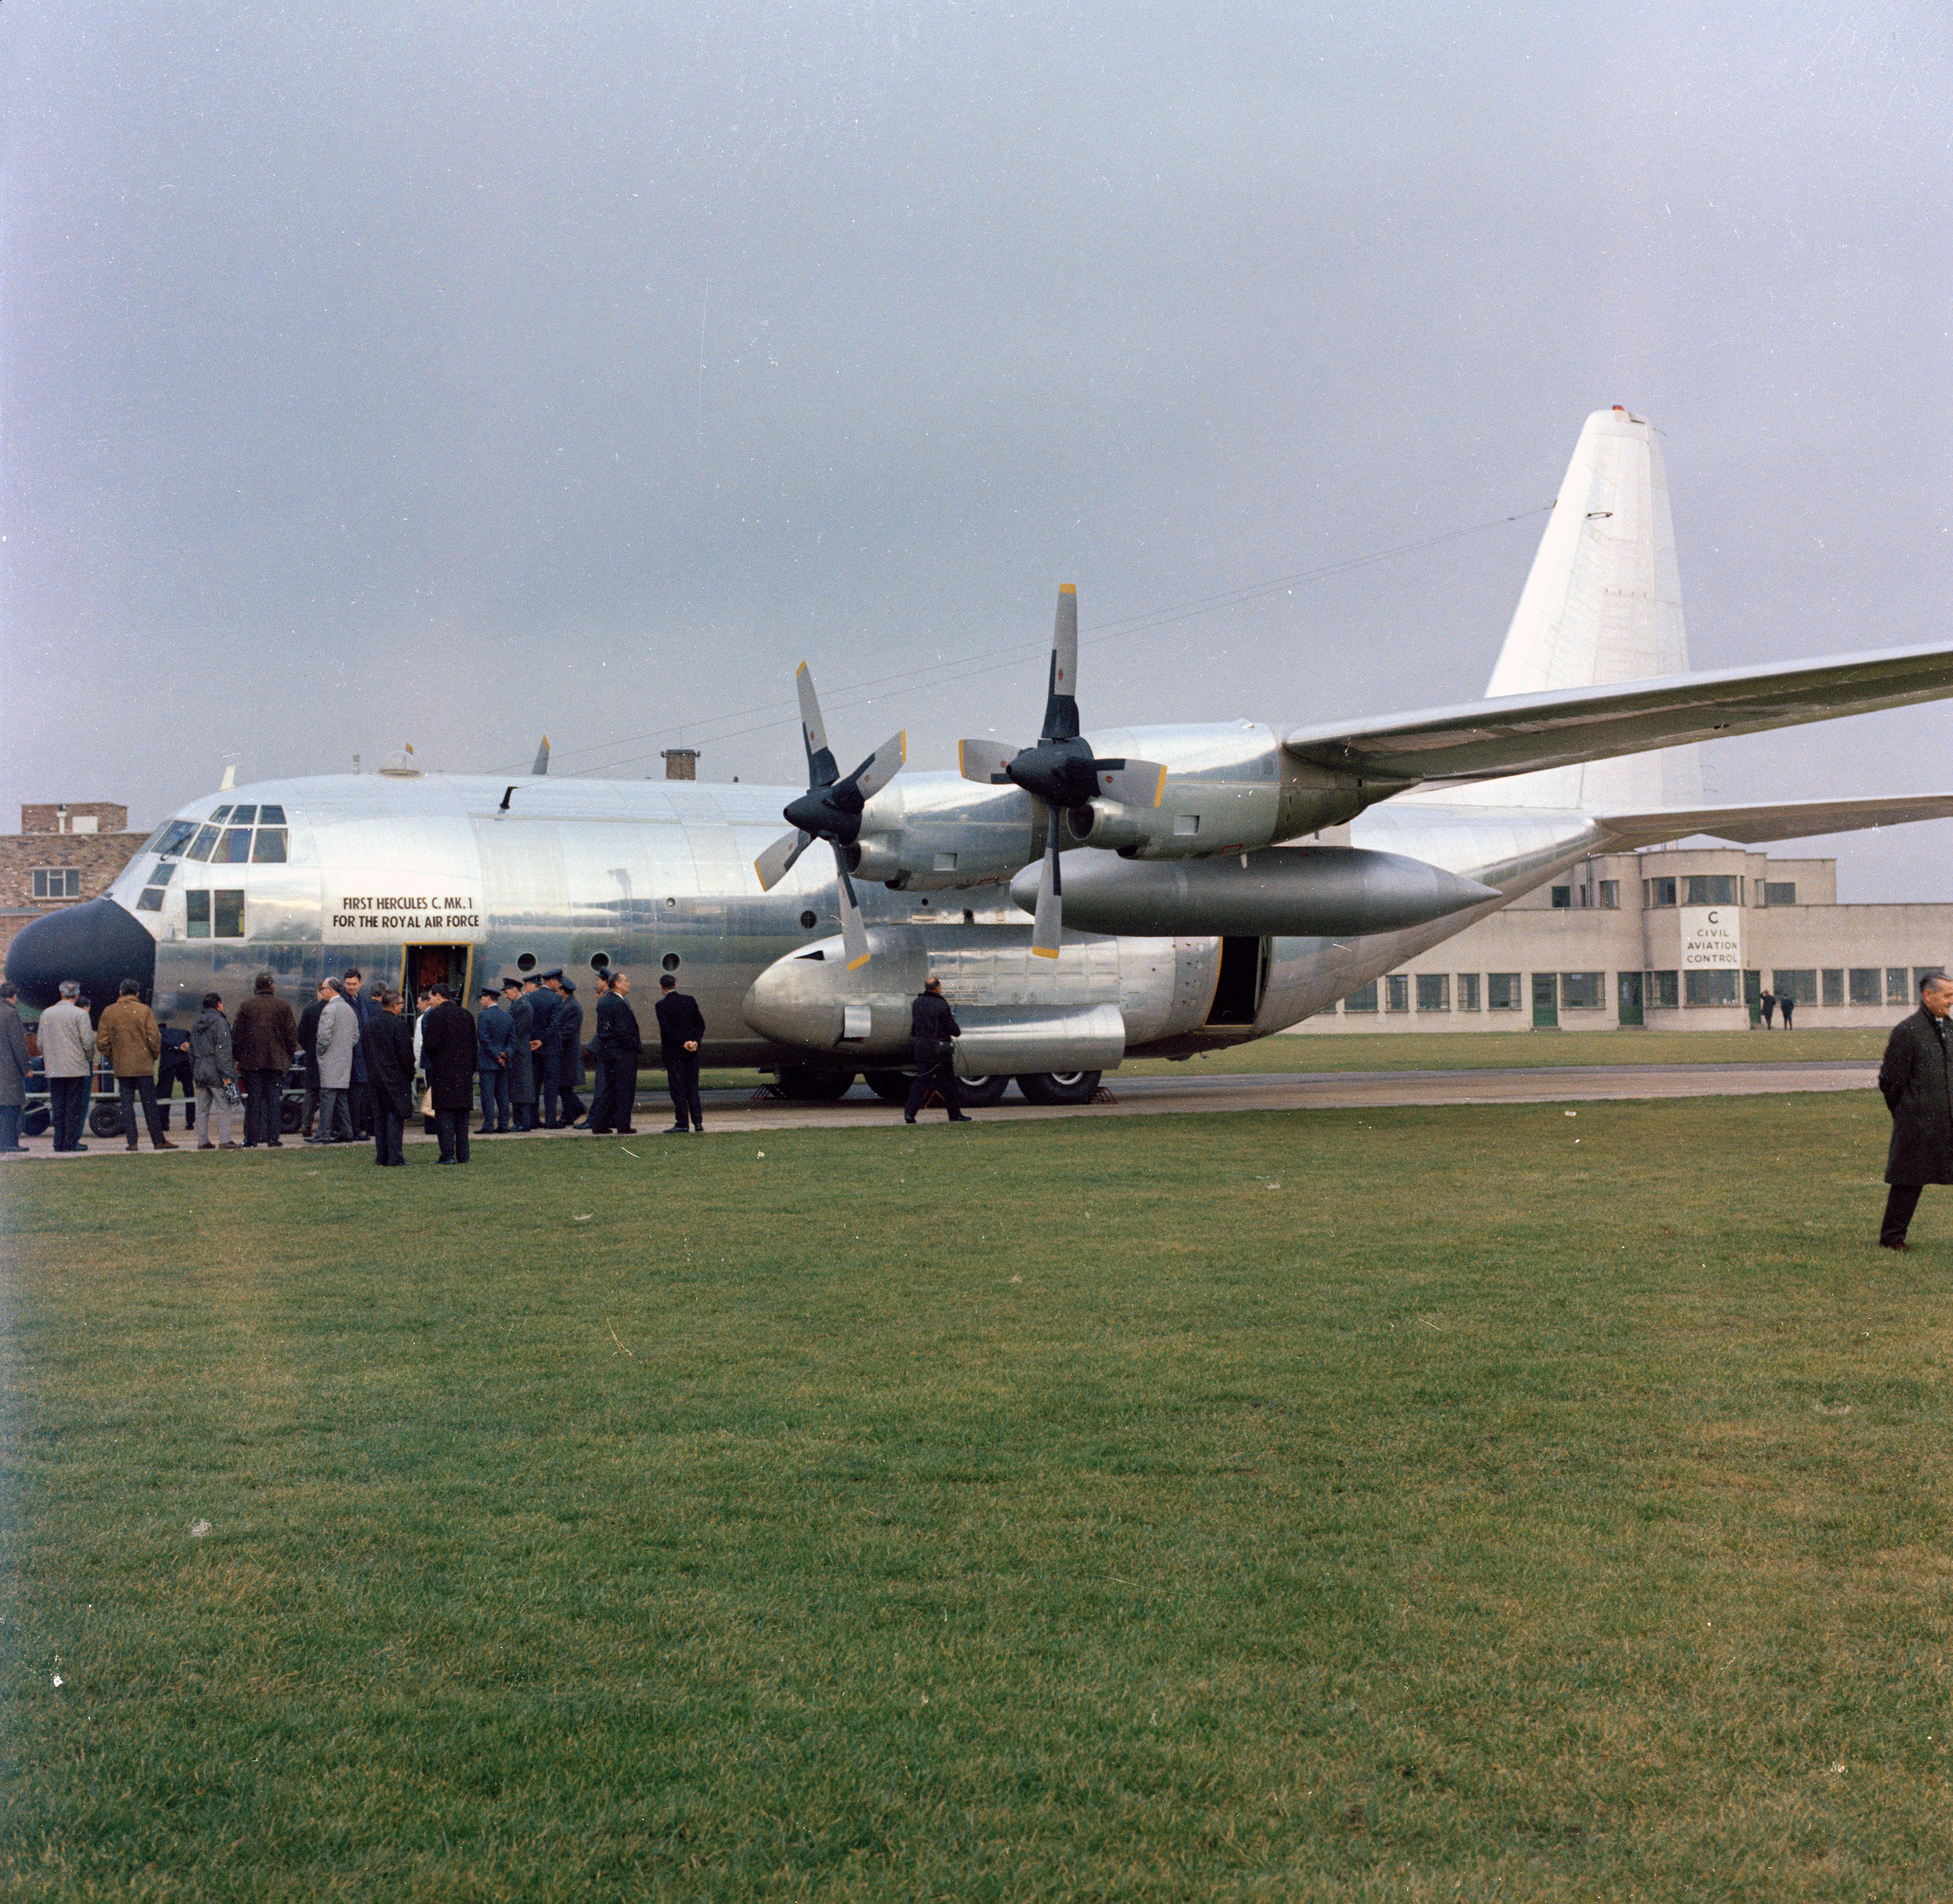 The first of 66 RAF Hercules C.1 shown after arrival at Marshall’s of Cambridge on 19 December 1966.